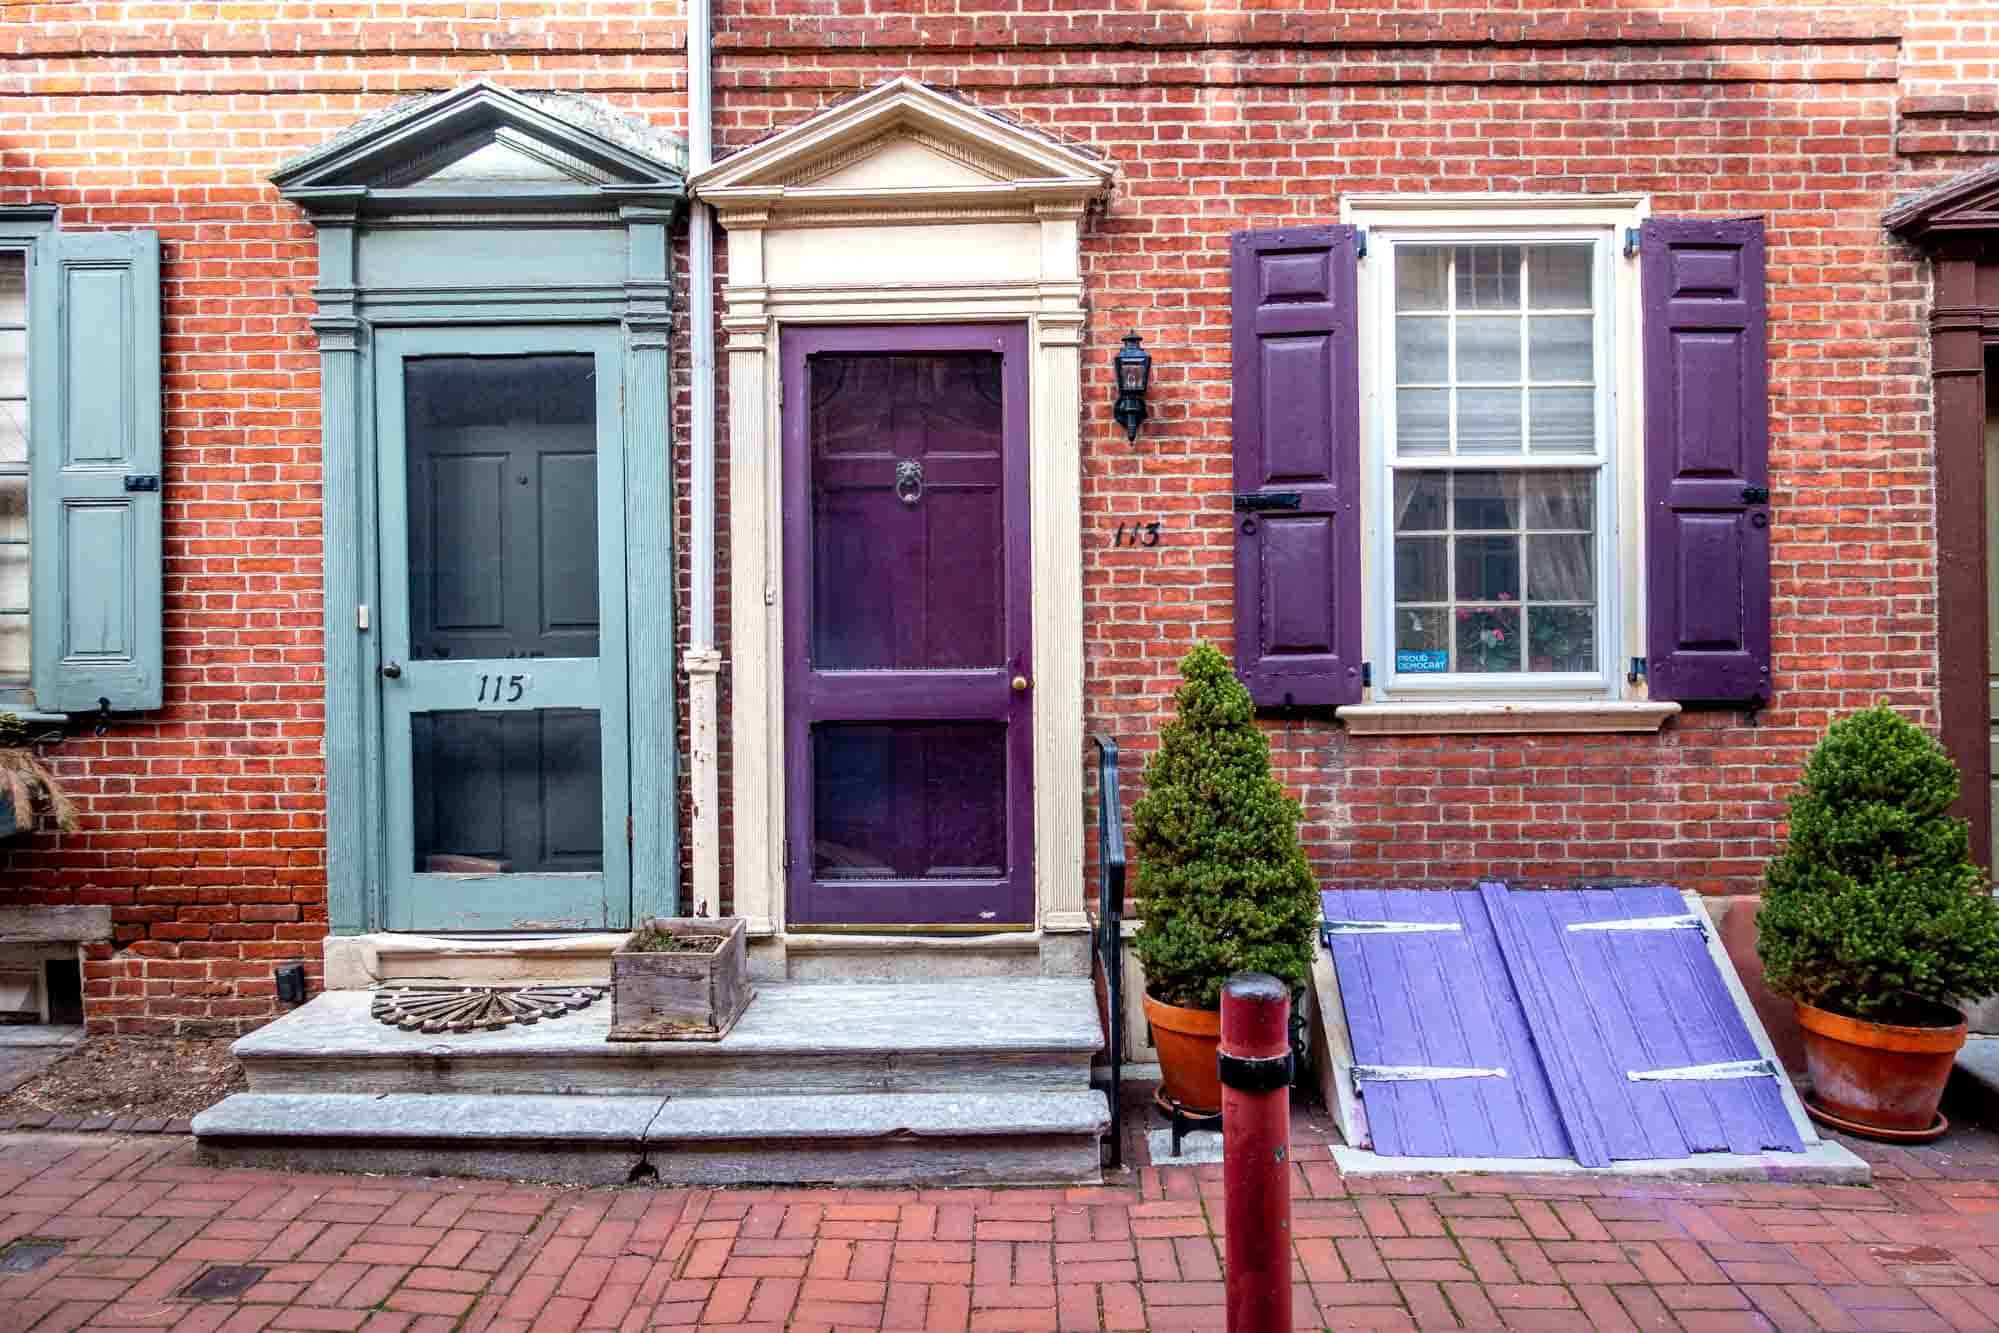 Two brick row homes--one with a blue door and one with a purple door and shutters.